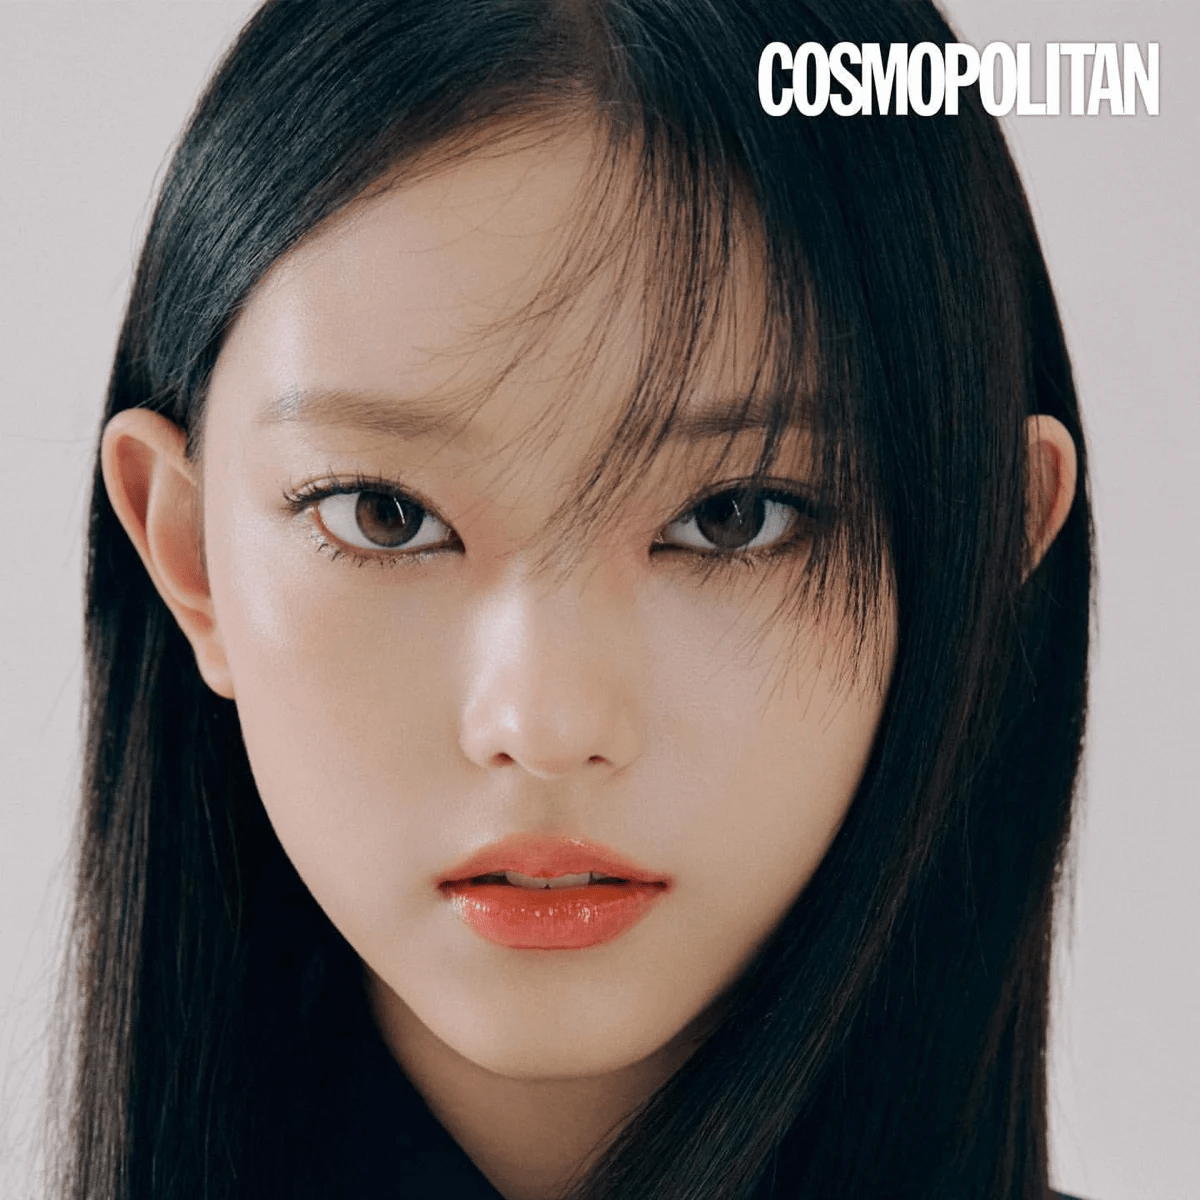 [THEQOO] First Newjeans Haerin photo shoot for Cosmopolitan x Dior beauty